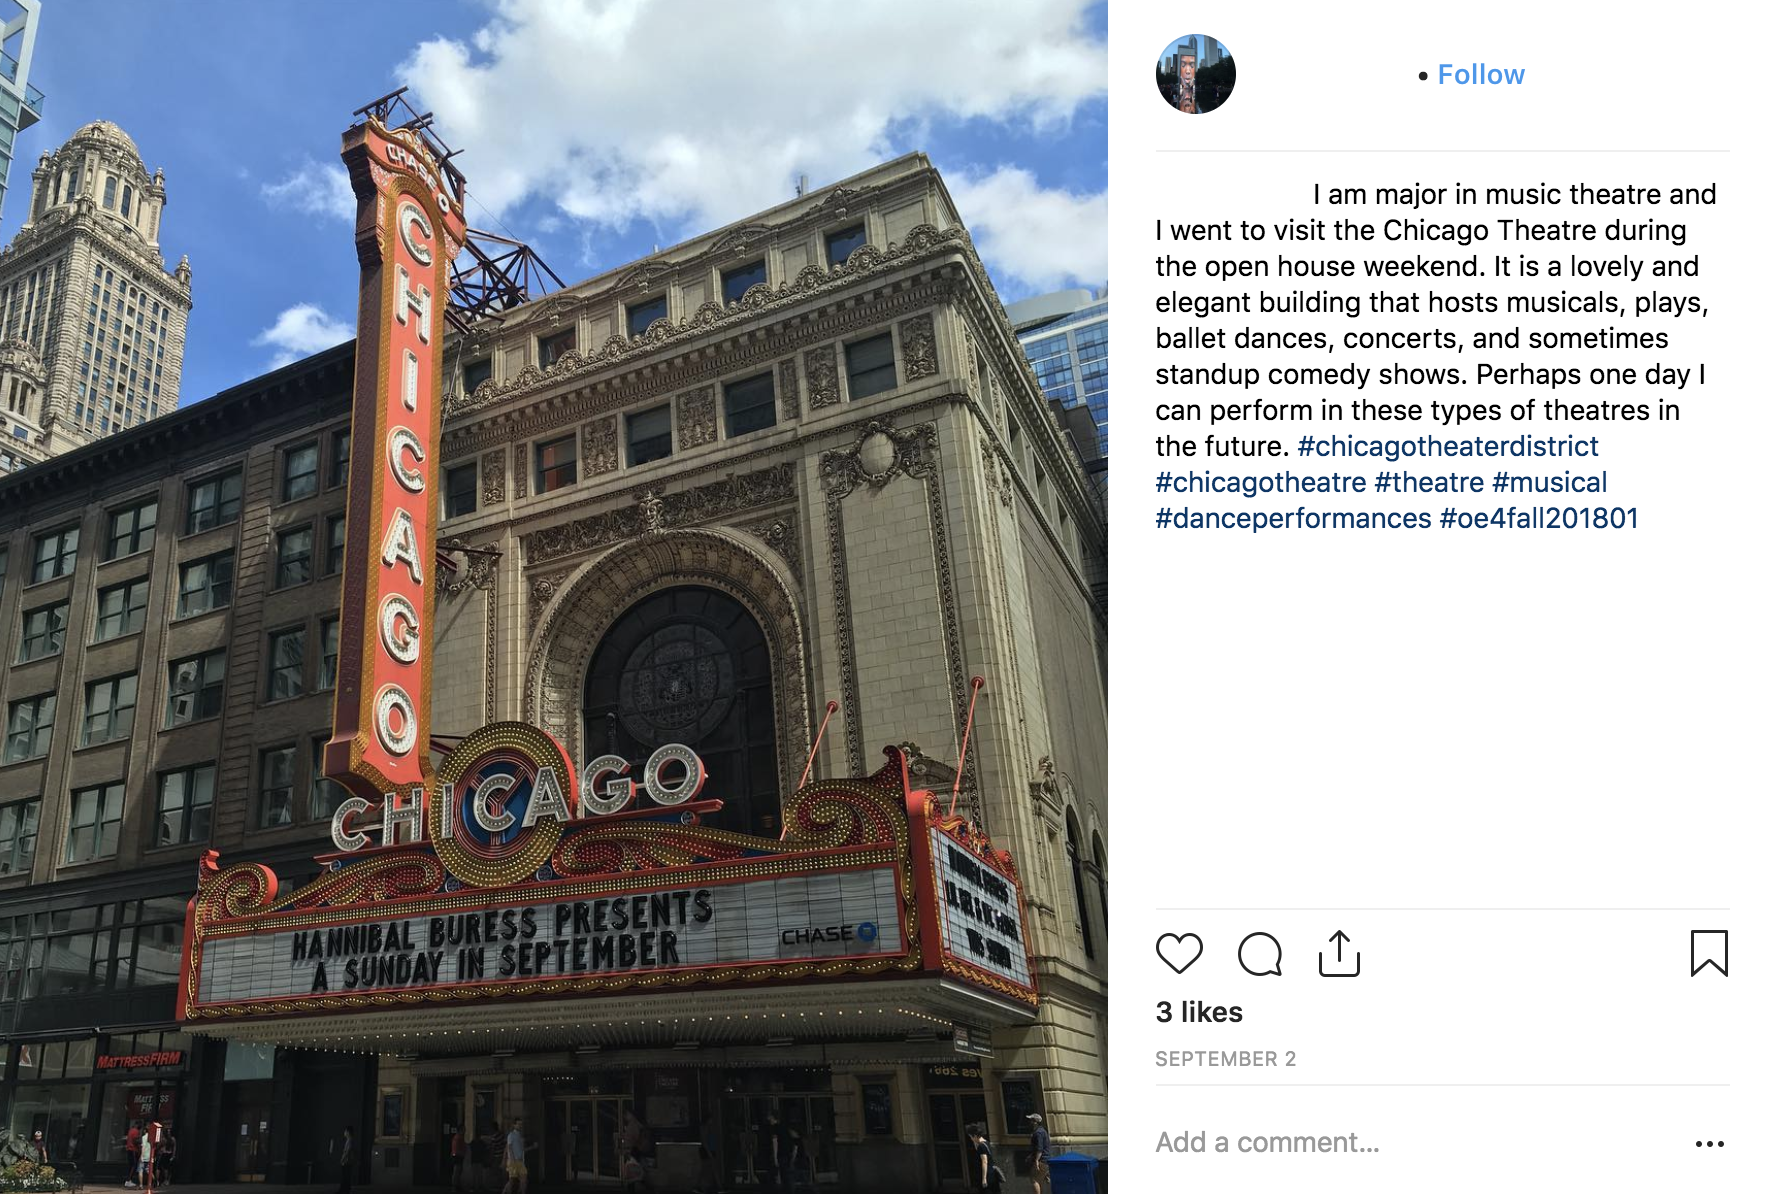 Example of music theatre Instagram project.